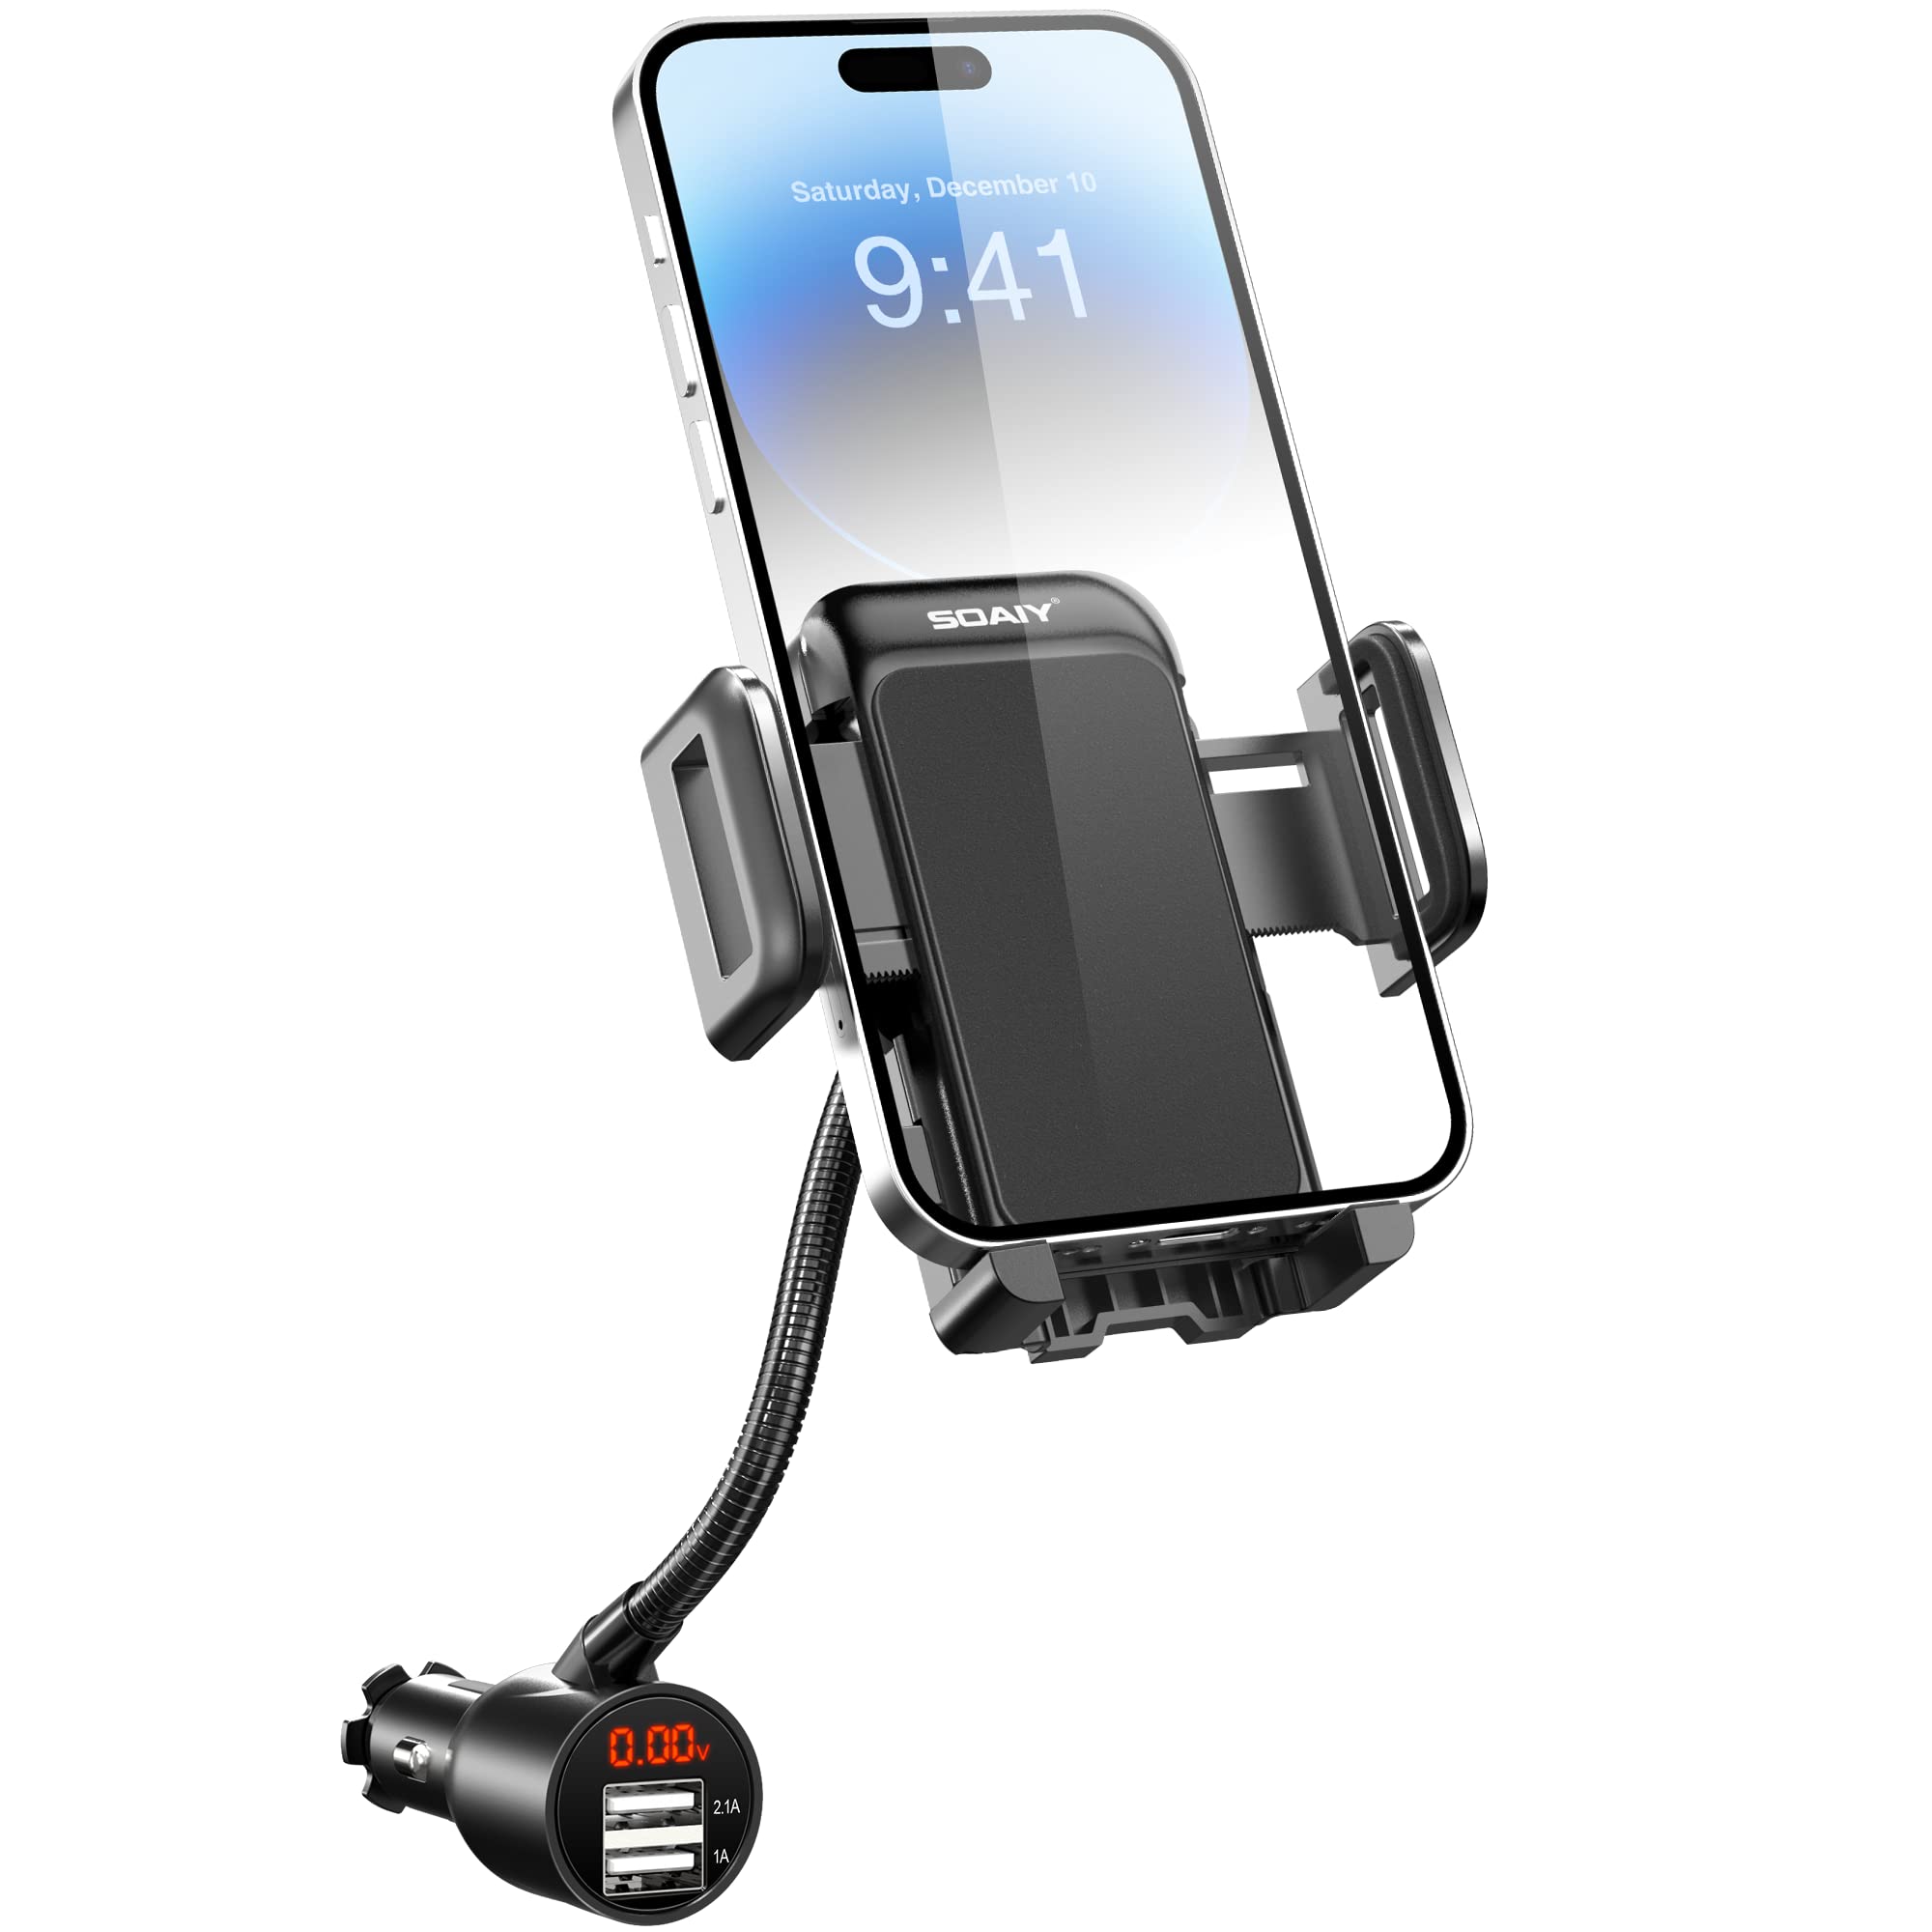 Book Cover 3-in-1 Cigarette Lighter Car Mount + Voltage Detector, SOAIY Car Mount Holder Cradle w/Dual USB 3.1A, Display Voltage Current Compatible with iPhoneXS XS Max XR X 8 7 6s 6 5s Samsung S8 S7 S6 S5